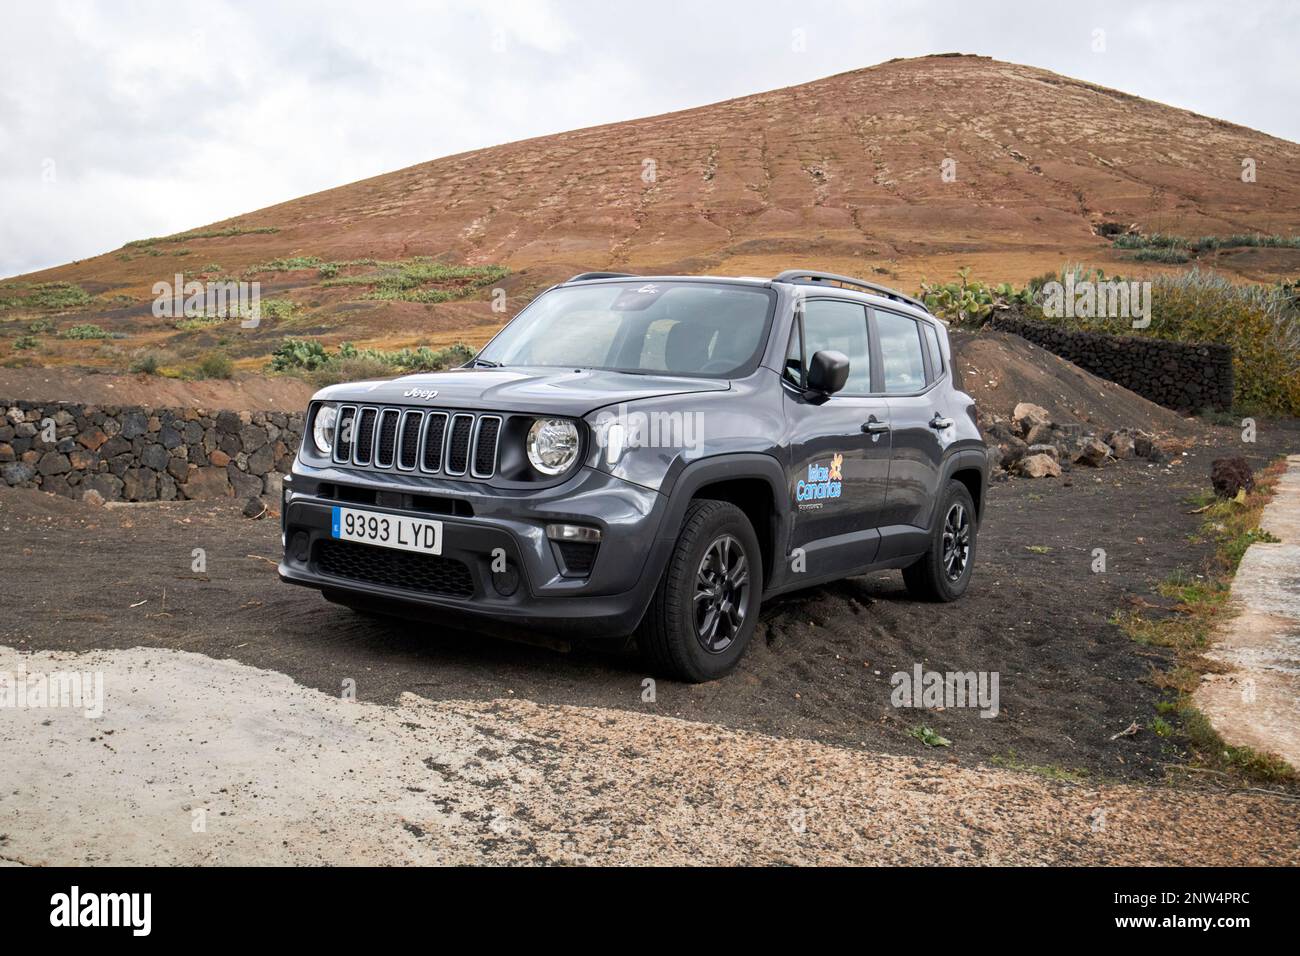 jeep renegade hire car parked off road beneath volcano in Lanzarote, Canary Islands, Spain Stock Photo